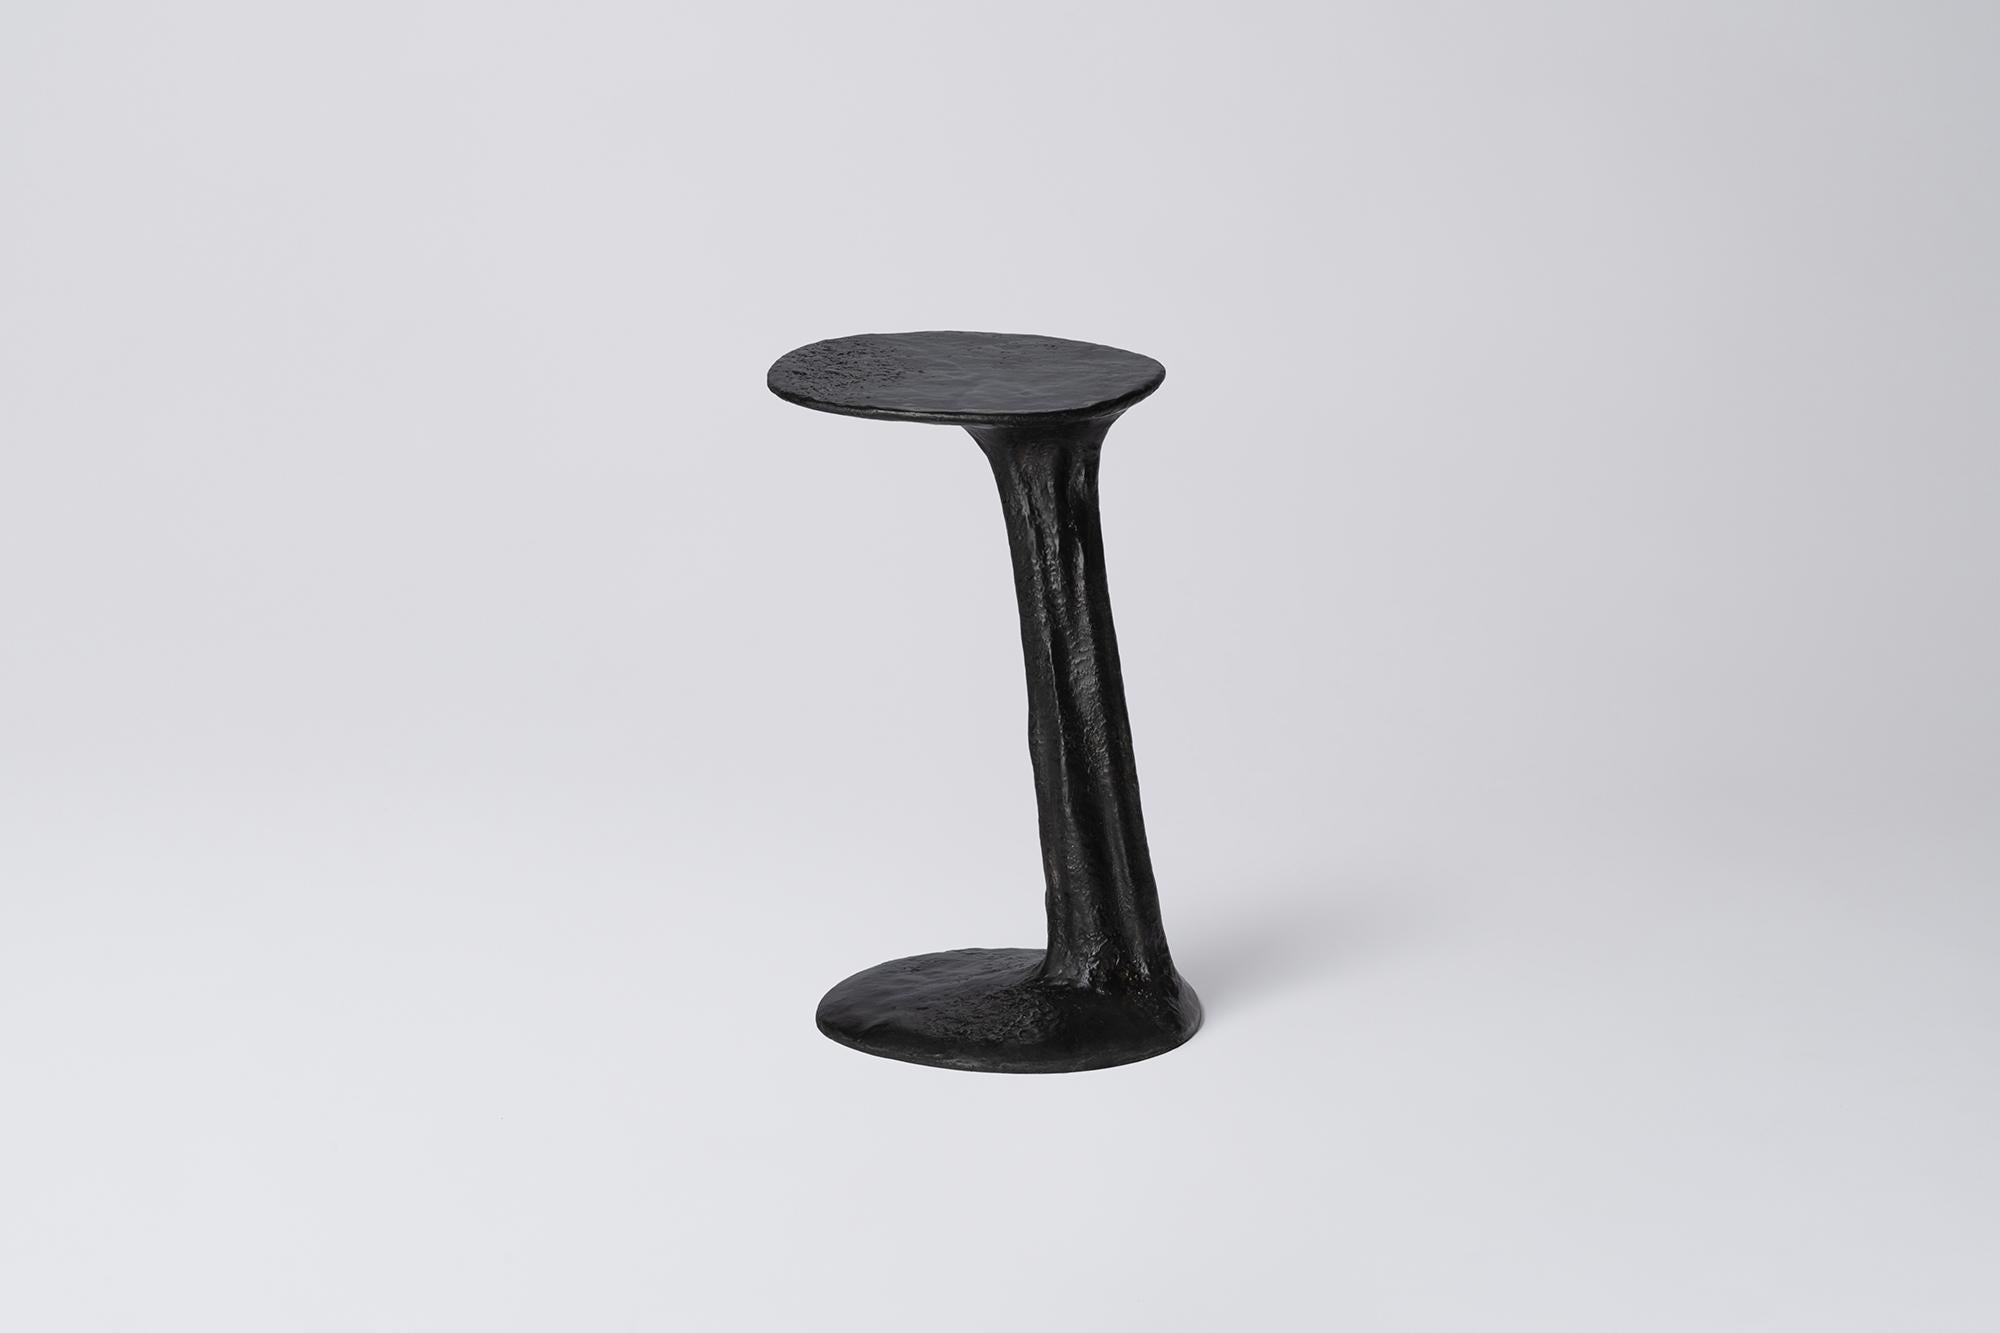 Black Cast Brass Lava Small Side Table by Atelier V&F
Dimensions: D 35 x W 30 x H 53 cm. 
Materials: Cast brass with a black finish.

Available in different finishes (cast, black and silver). Available in two different sizes. Prices may vary. Please